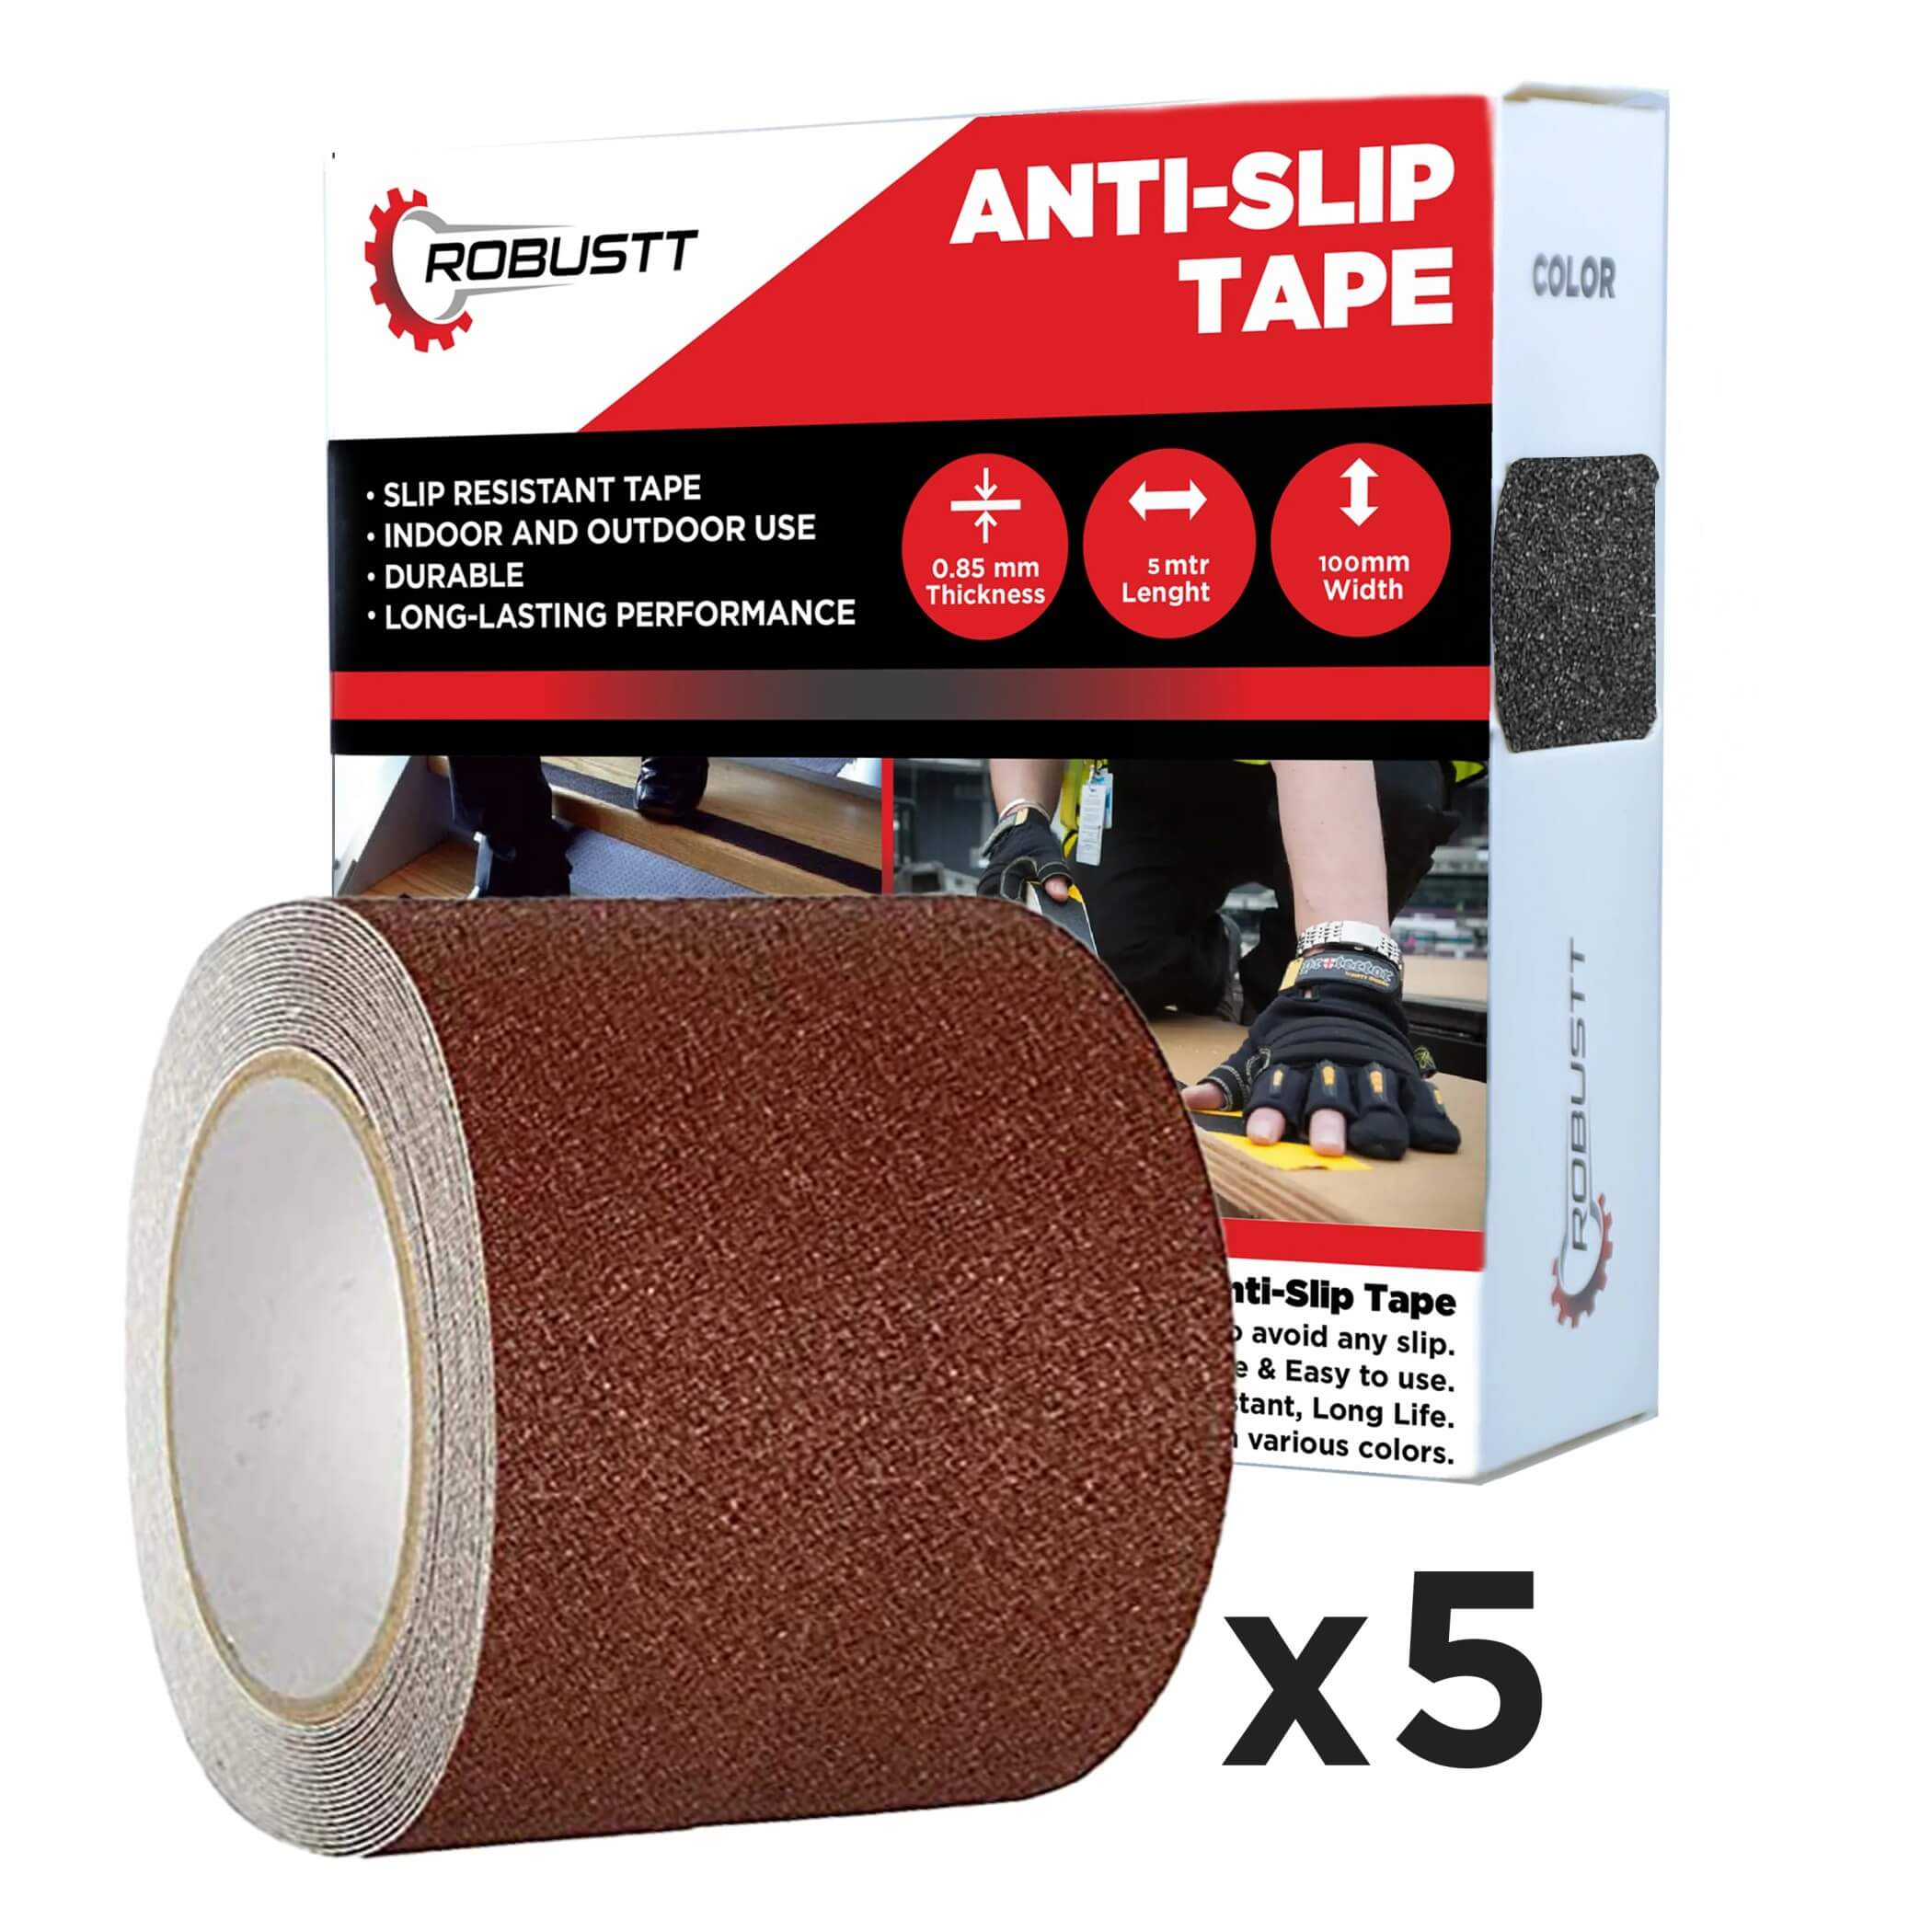 robustt-anti-skid-antislip-5mtr-guaranteed-x100mm-brown-fall-resistant-with-pet-material-and-solvent-acrylic-adhesive-tape-pack-of-5